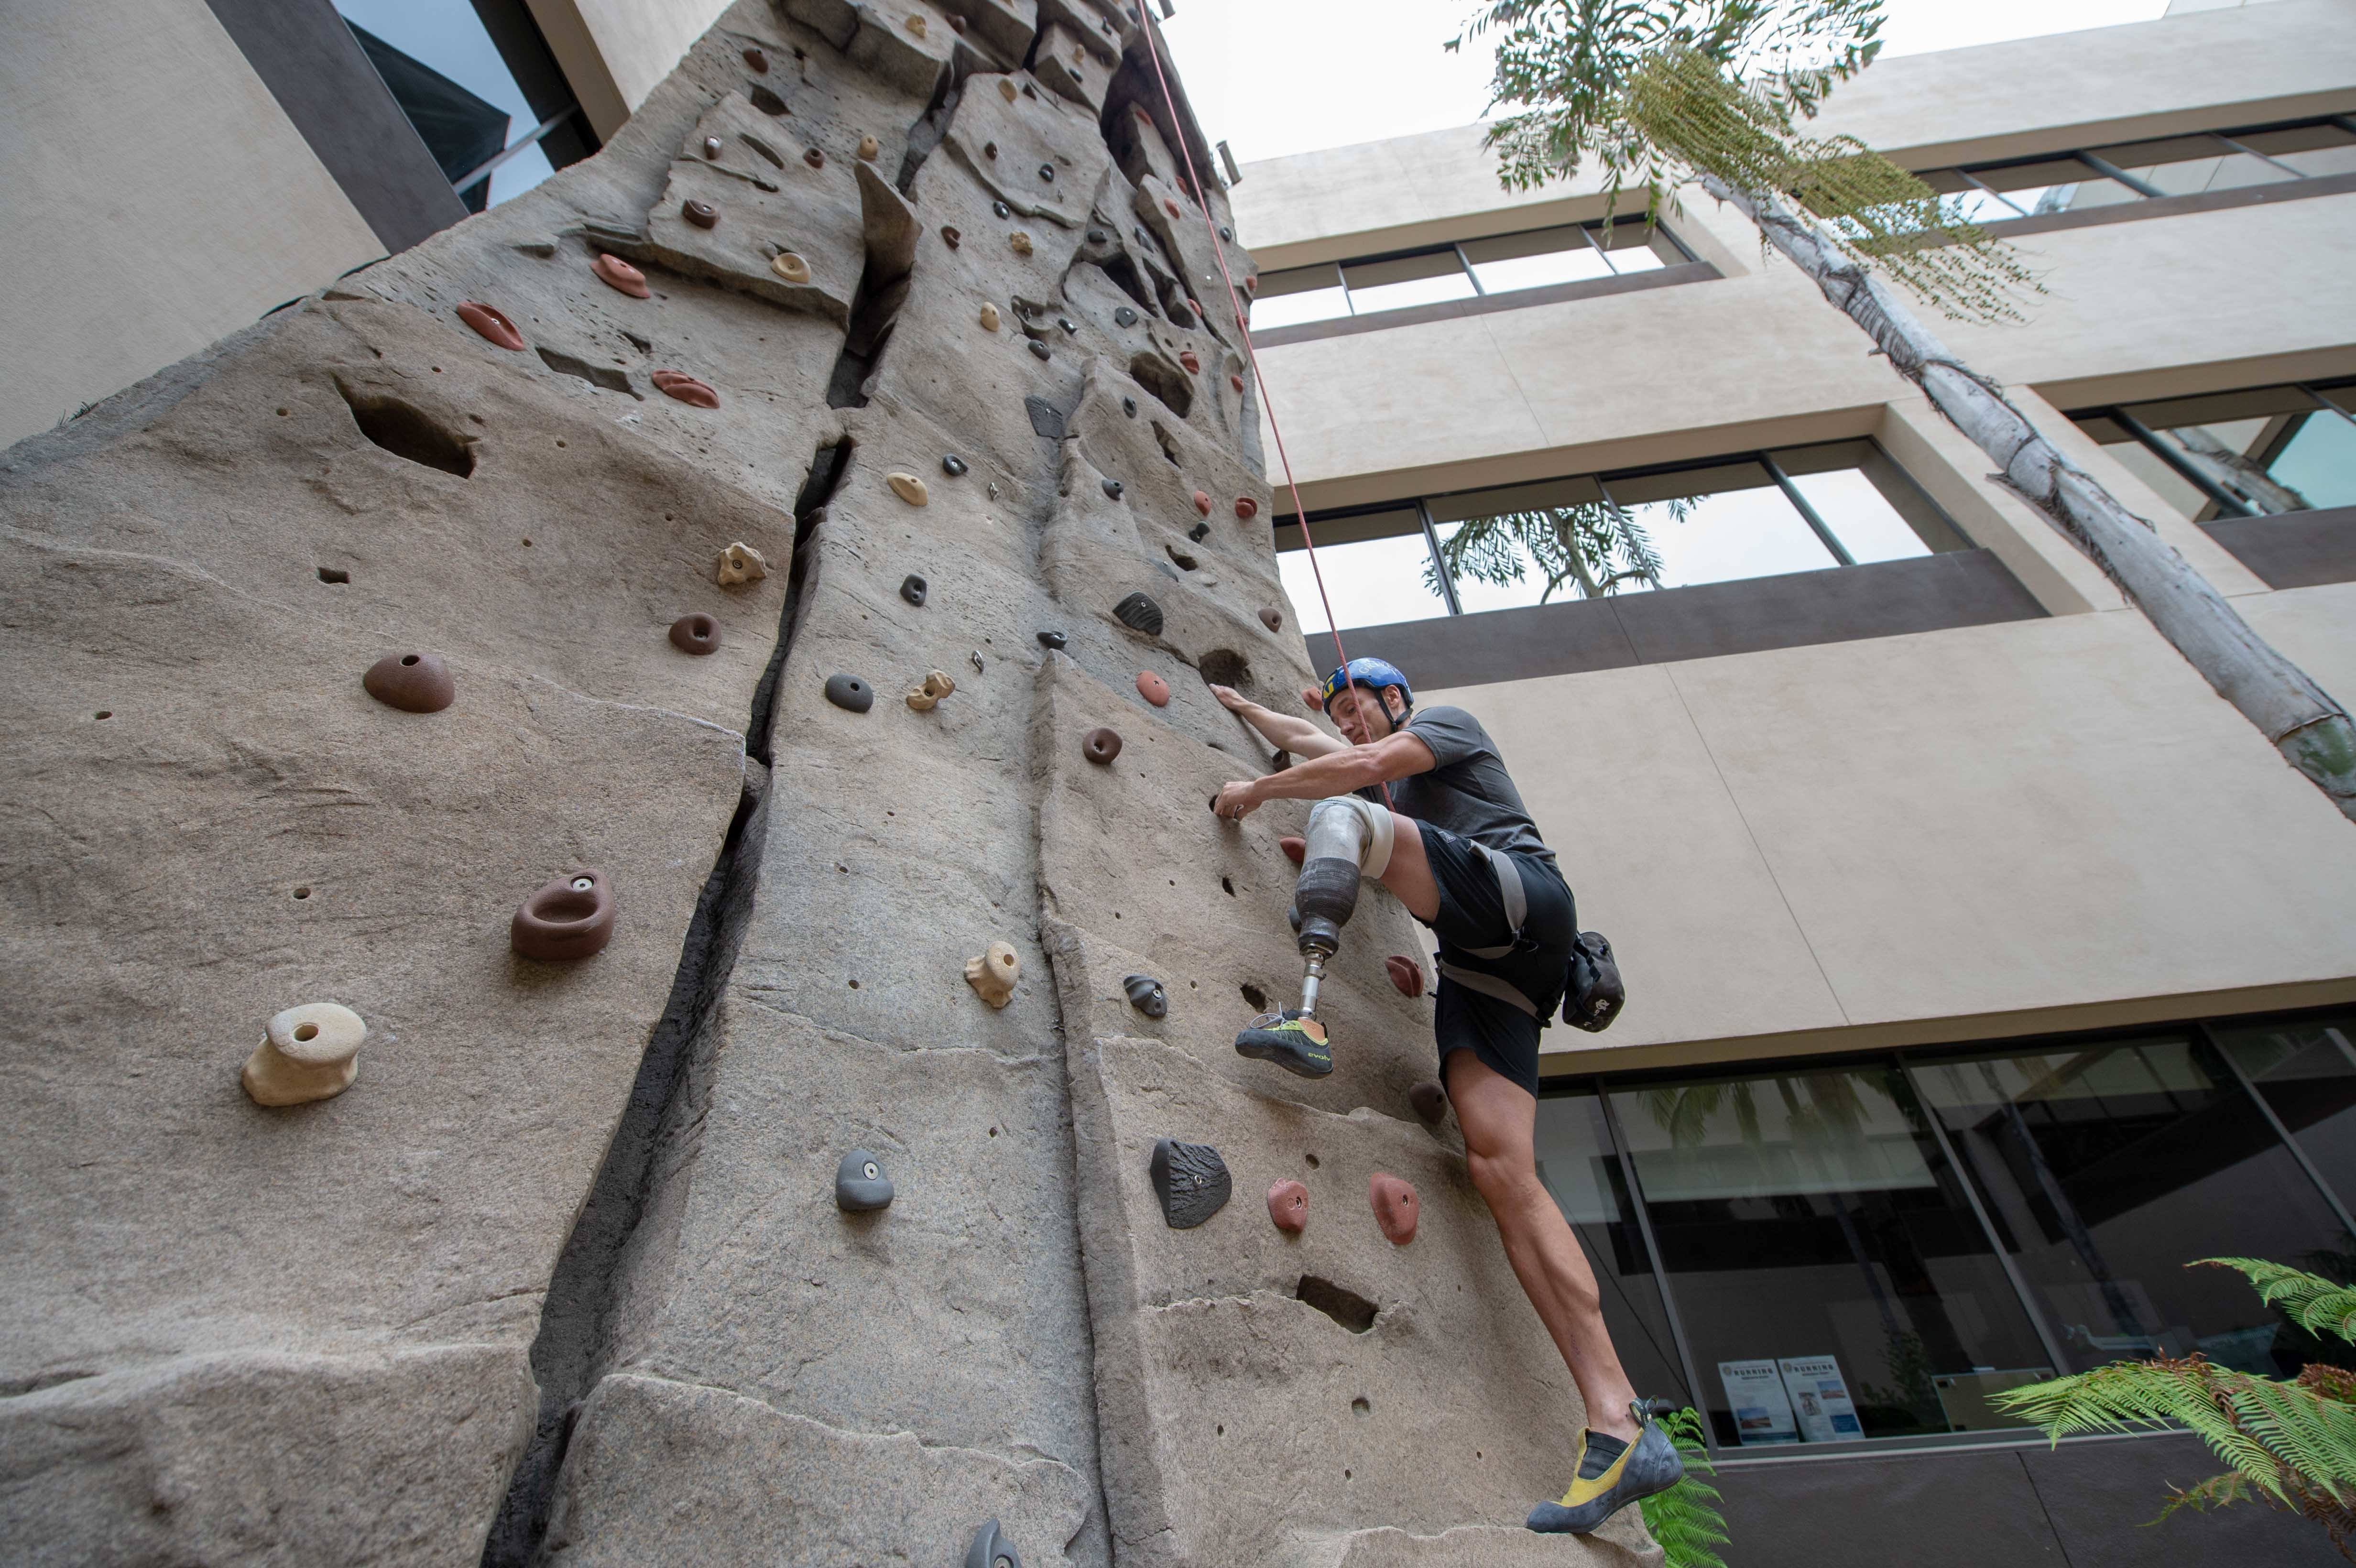 Senior Chief Navy Diver Ryan Steinkamp, assigned to Naval Construction Battalion Center Port Hueneme, Calif., rock climbs in Naval Medical Center San Diego’s (NMCSD) physical therapy department.